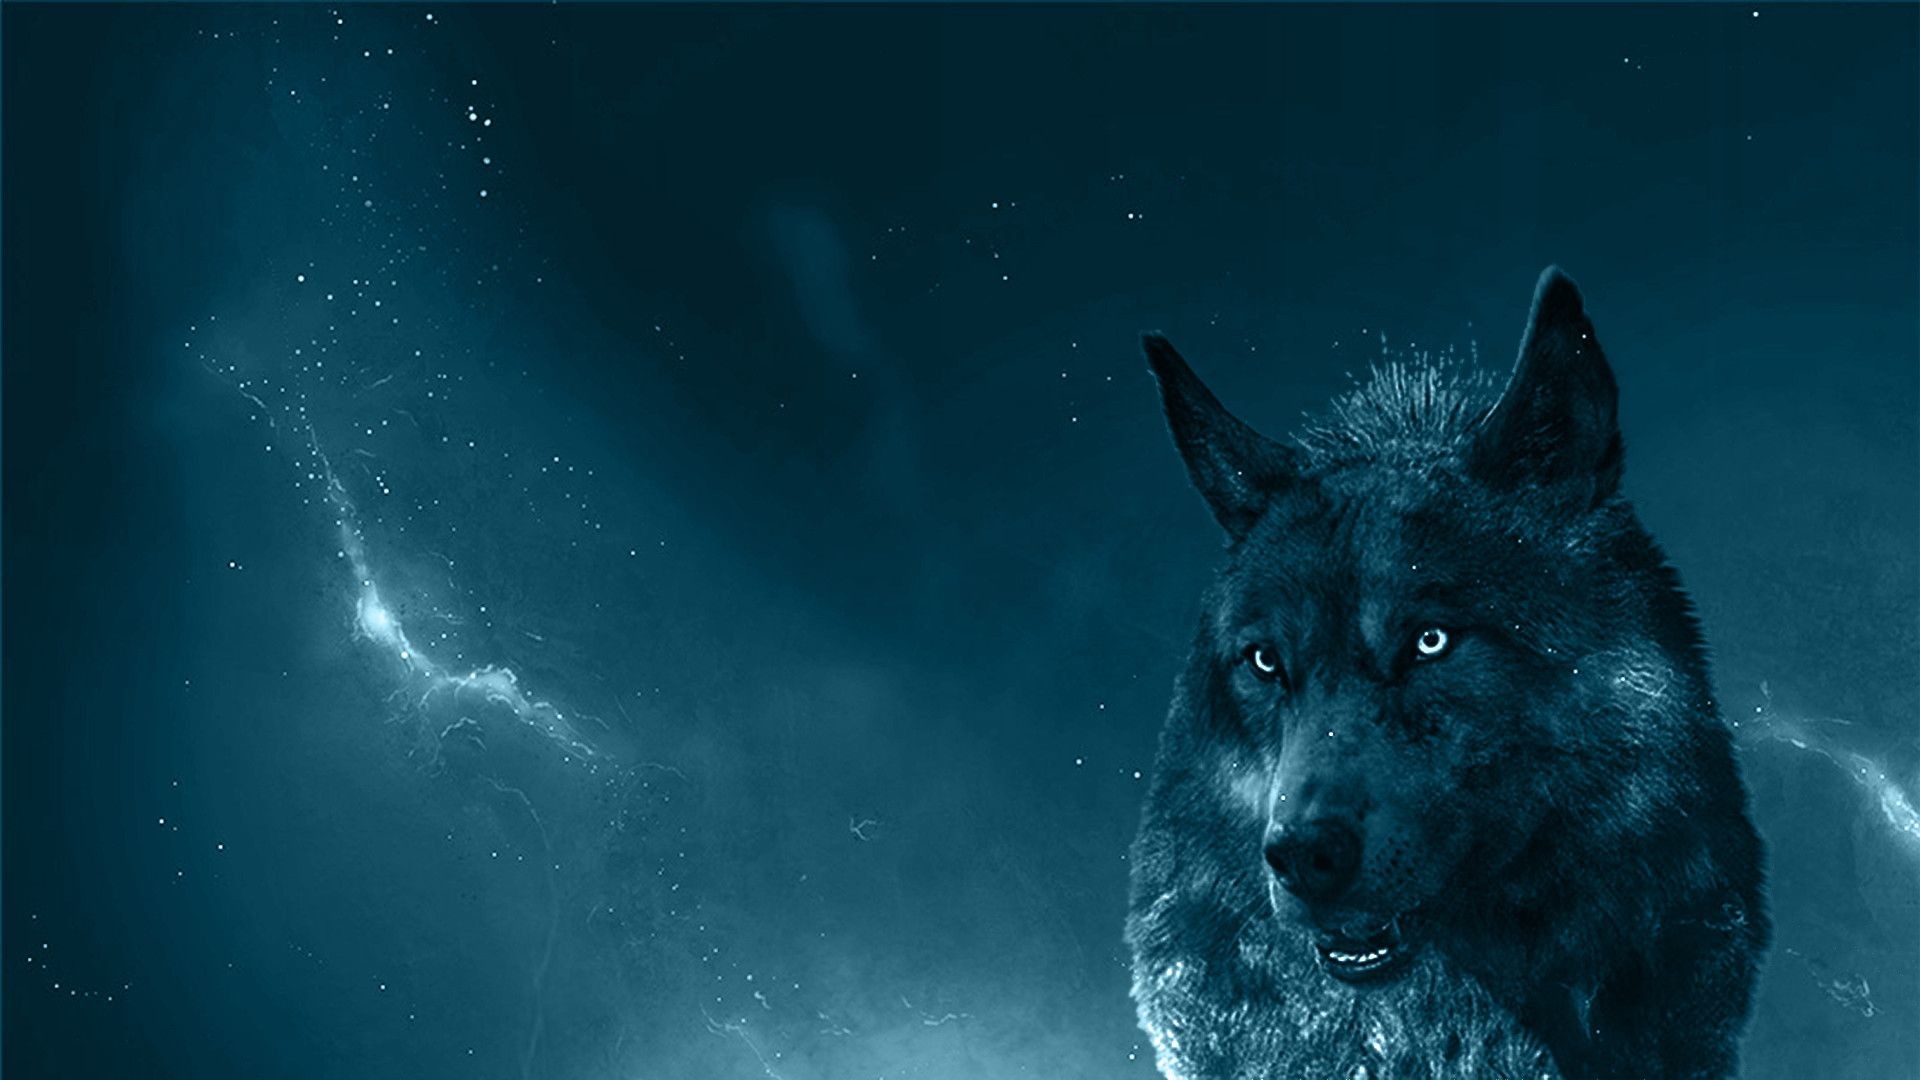 Moving Wolf Wallpapers.